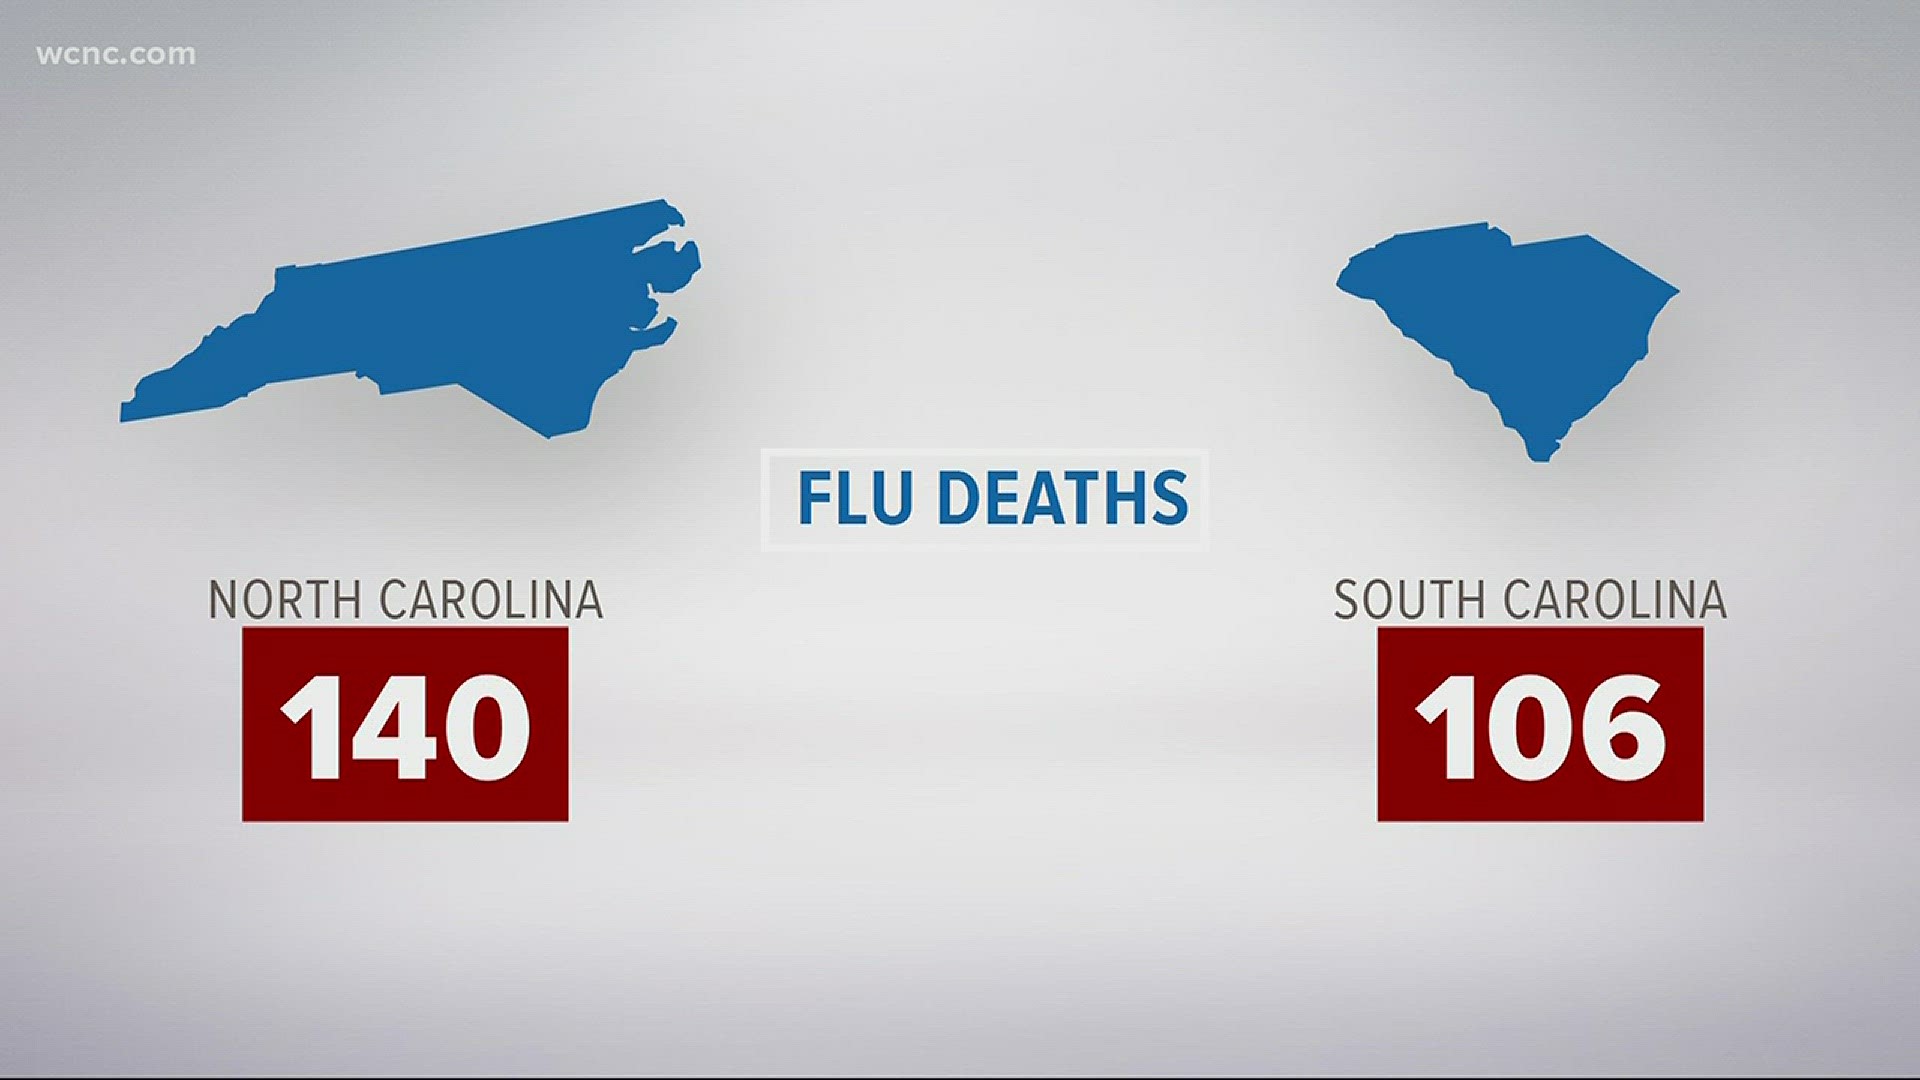 140 deaths in NC and 106 deaths in SC